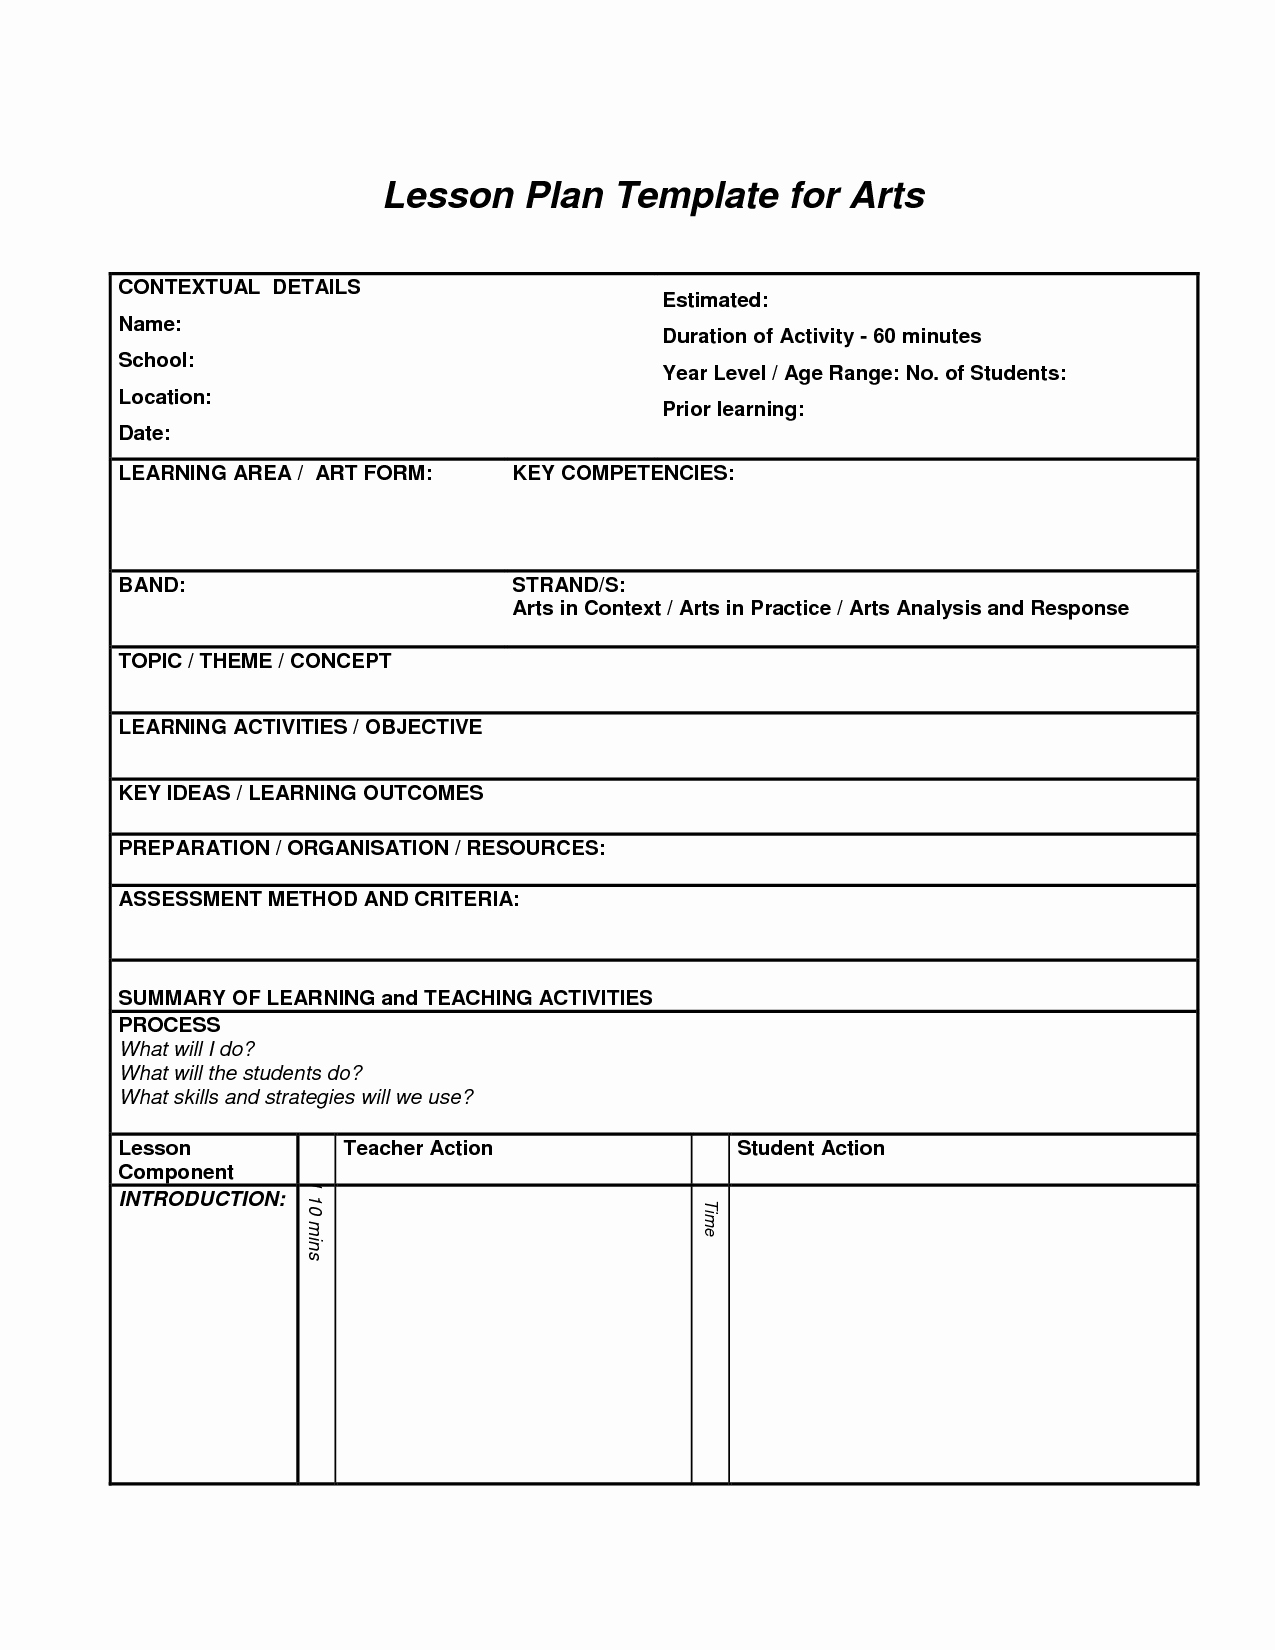 Lesson Plan Template Free Awesome Lesson Plan Template for Arts